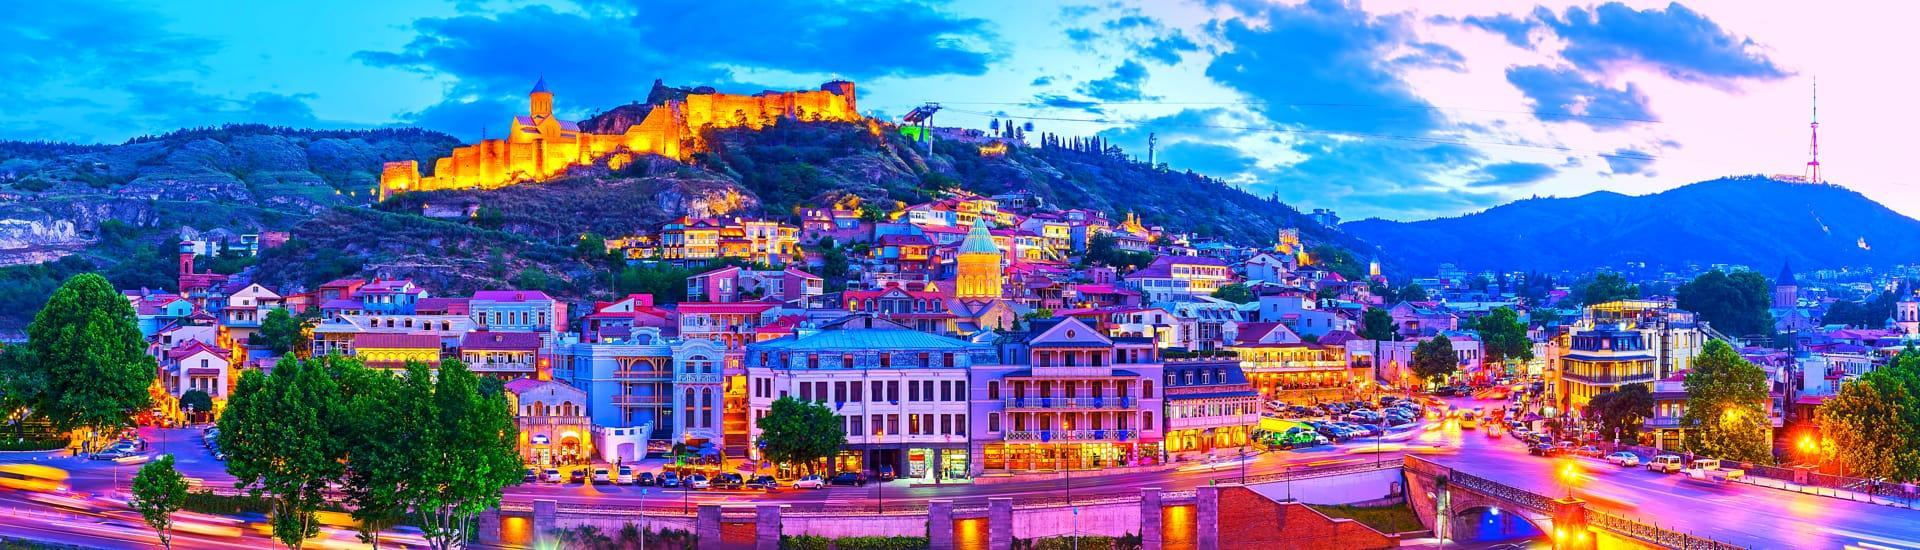 Find the Best Hotels in Tbilisi City